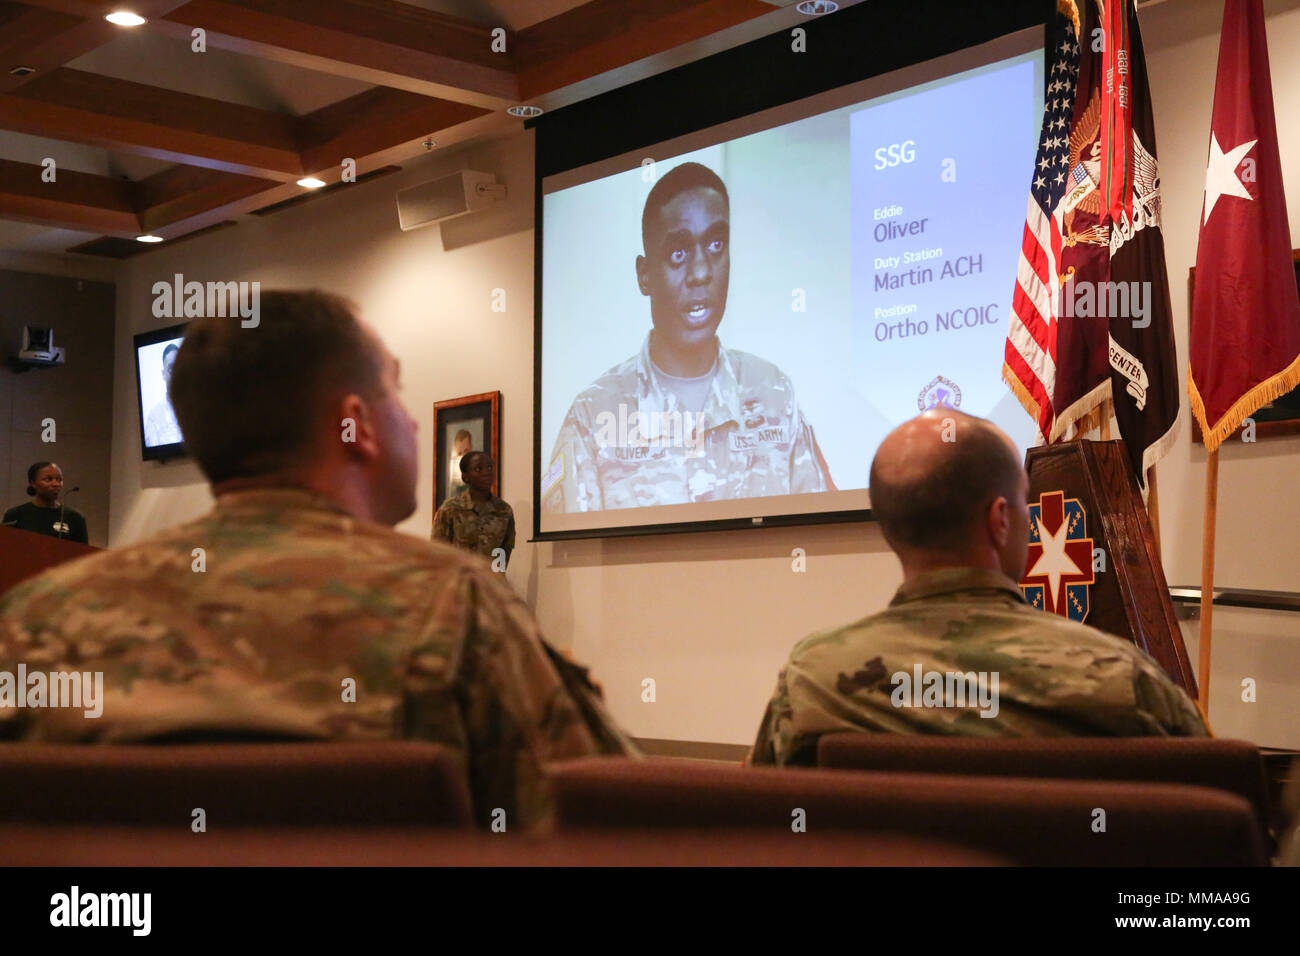 U.S. Army Sgt. Christopher Faulkner and Sgt. 1st Class Zachary Dispennette, assigned to the McDonald Army Health Center, watch the Best Medic Video during the 2017 Best Medic Competition Award Ceremony at Fort Bragg, N.C., Sept. 20, 2017. The competition tested the physical and mental toughness, as well as the technical competence, of each medic to identify the team moving forward to represent the region at the next level of the competition.  (U.S. Army photo by Pfc. Meleesa Gutierrez) Stock Photo